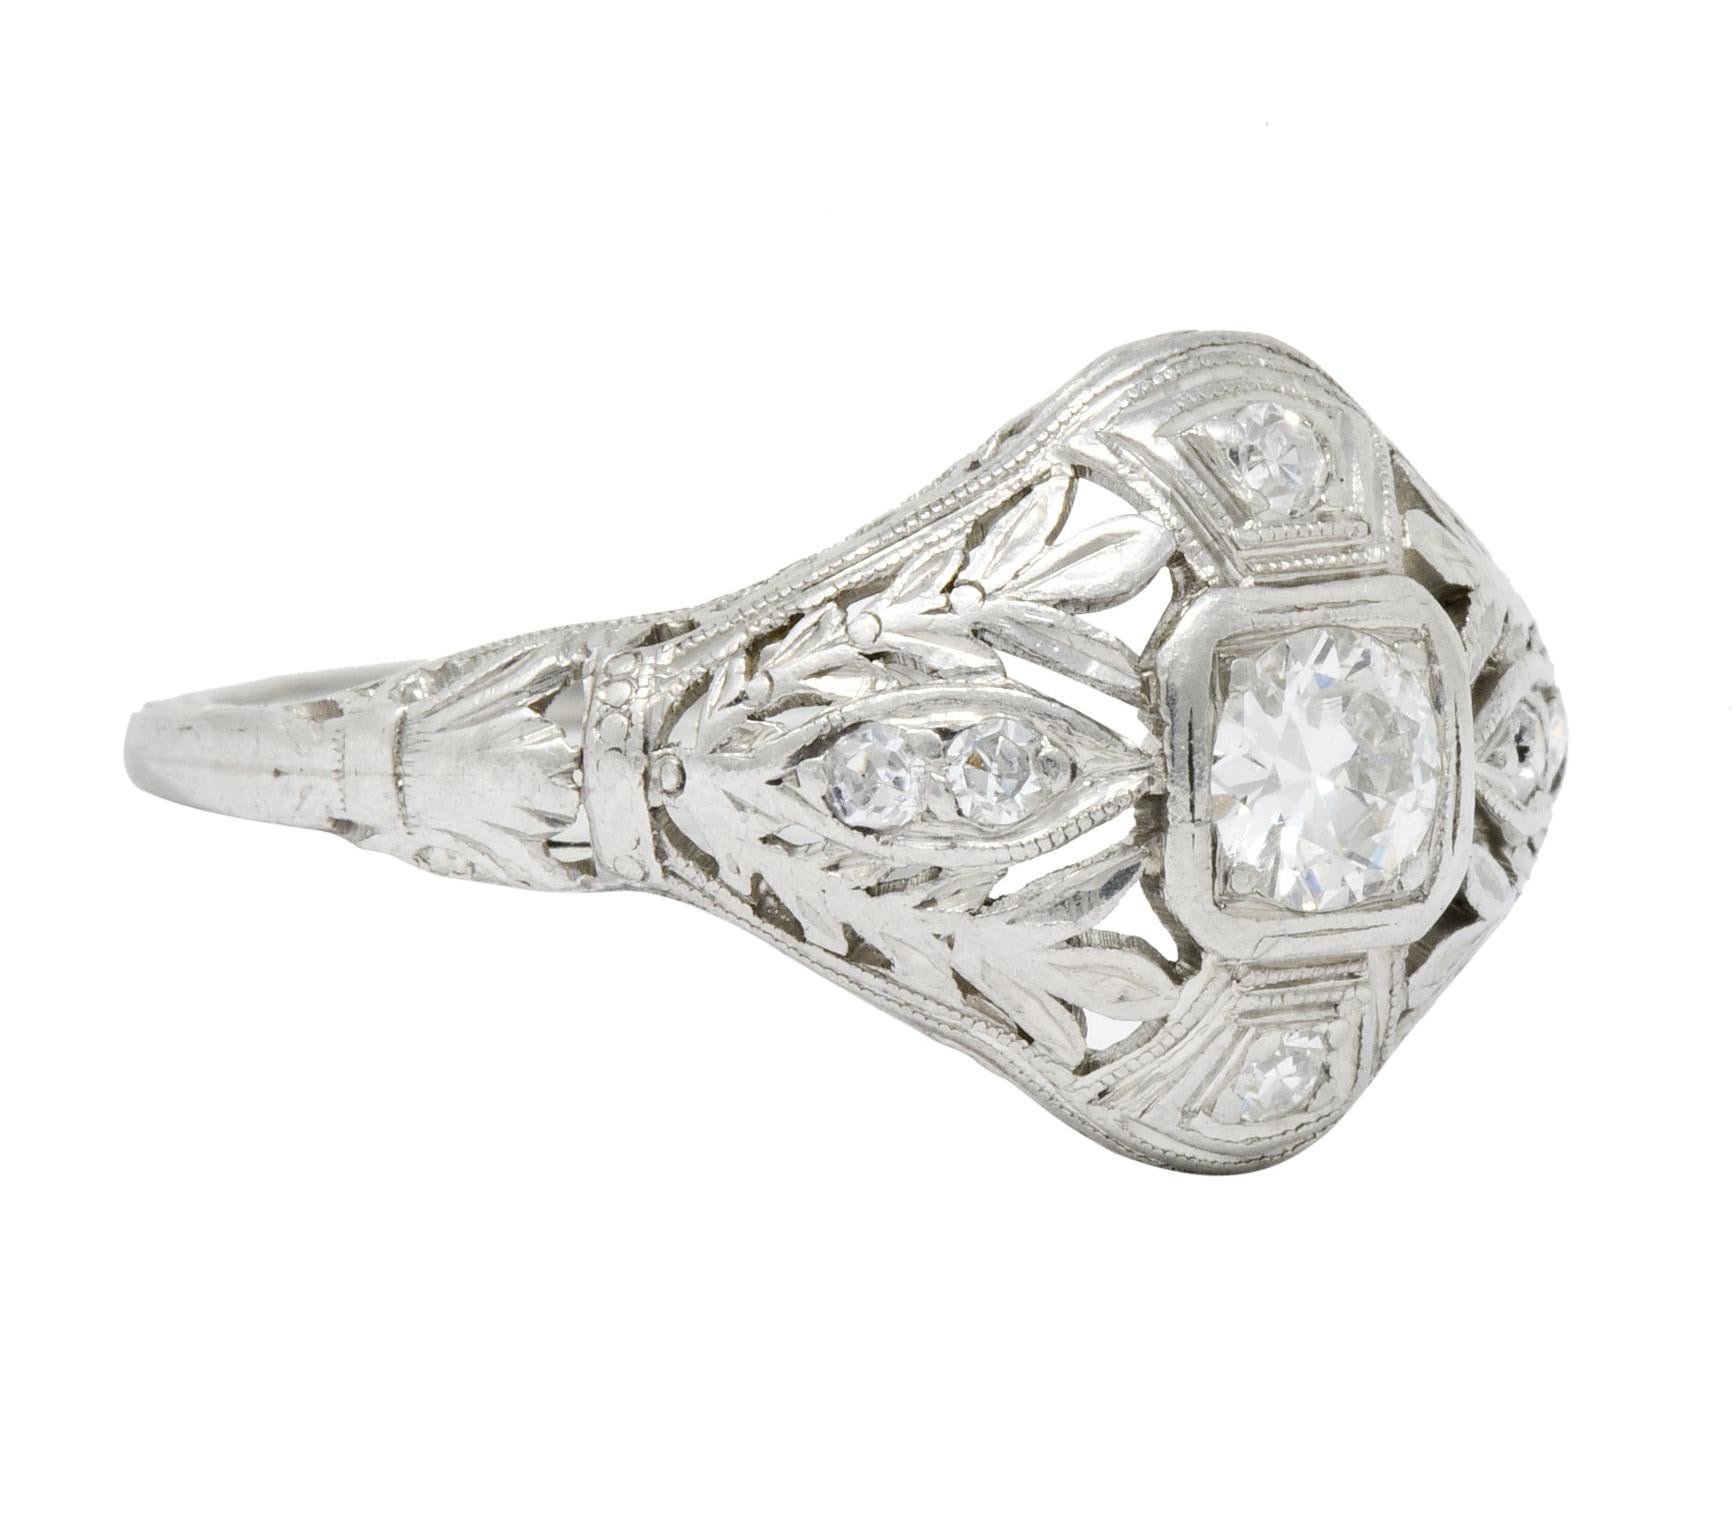 Centering an old European cut diamond weighing approximately 0.20 carat, H color and SI1 clarity

Bead set in a square form sitting low in the pierced foliate mounting with stylized leaf shoulders and engraving partially down shank

Accented at each